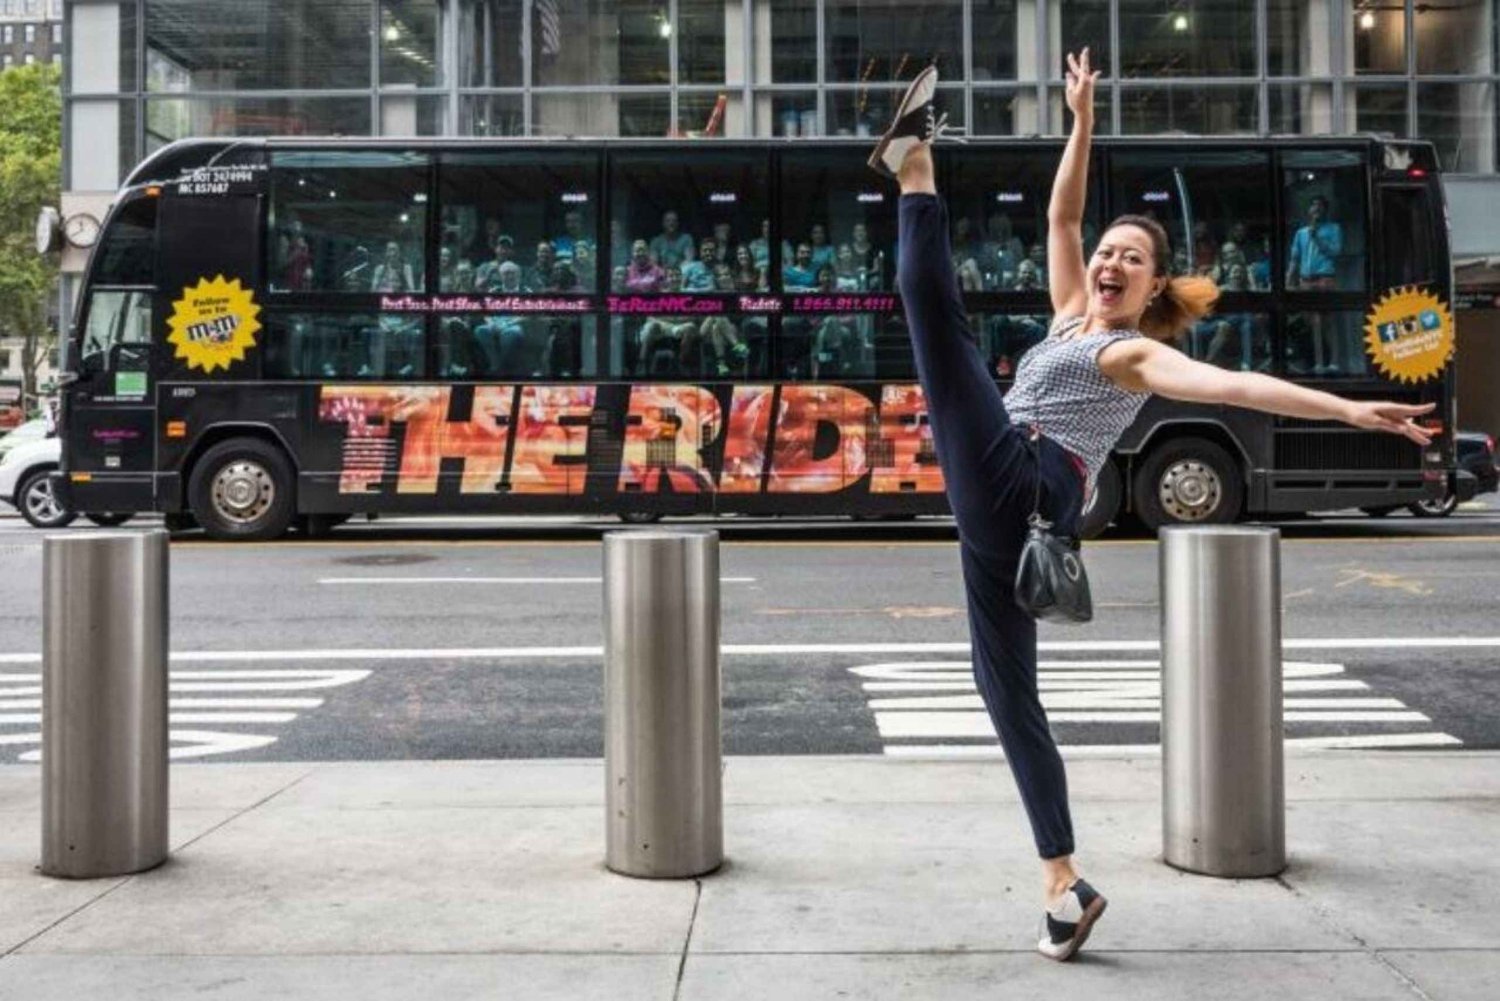 NYC: The Ride Theatre Bus & Best of Manhattan Rundgang